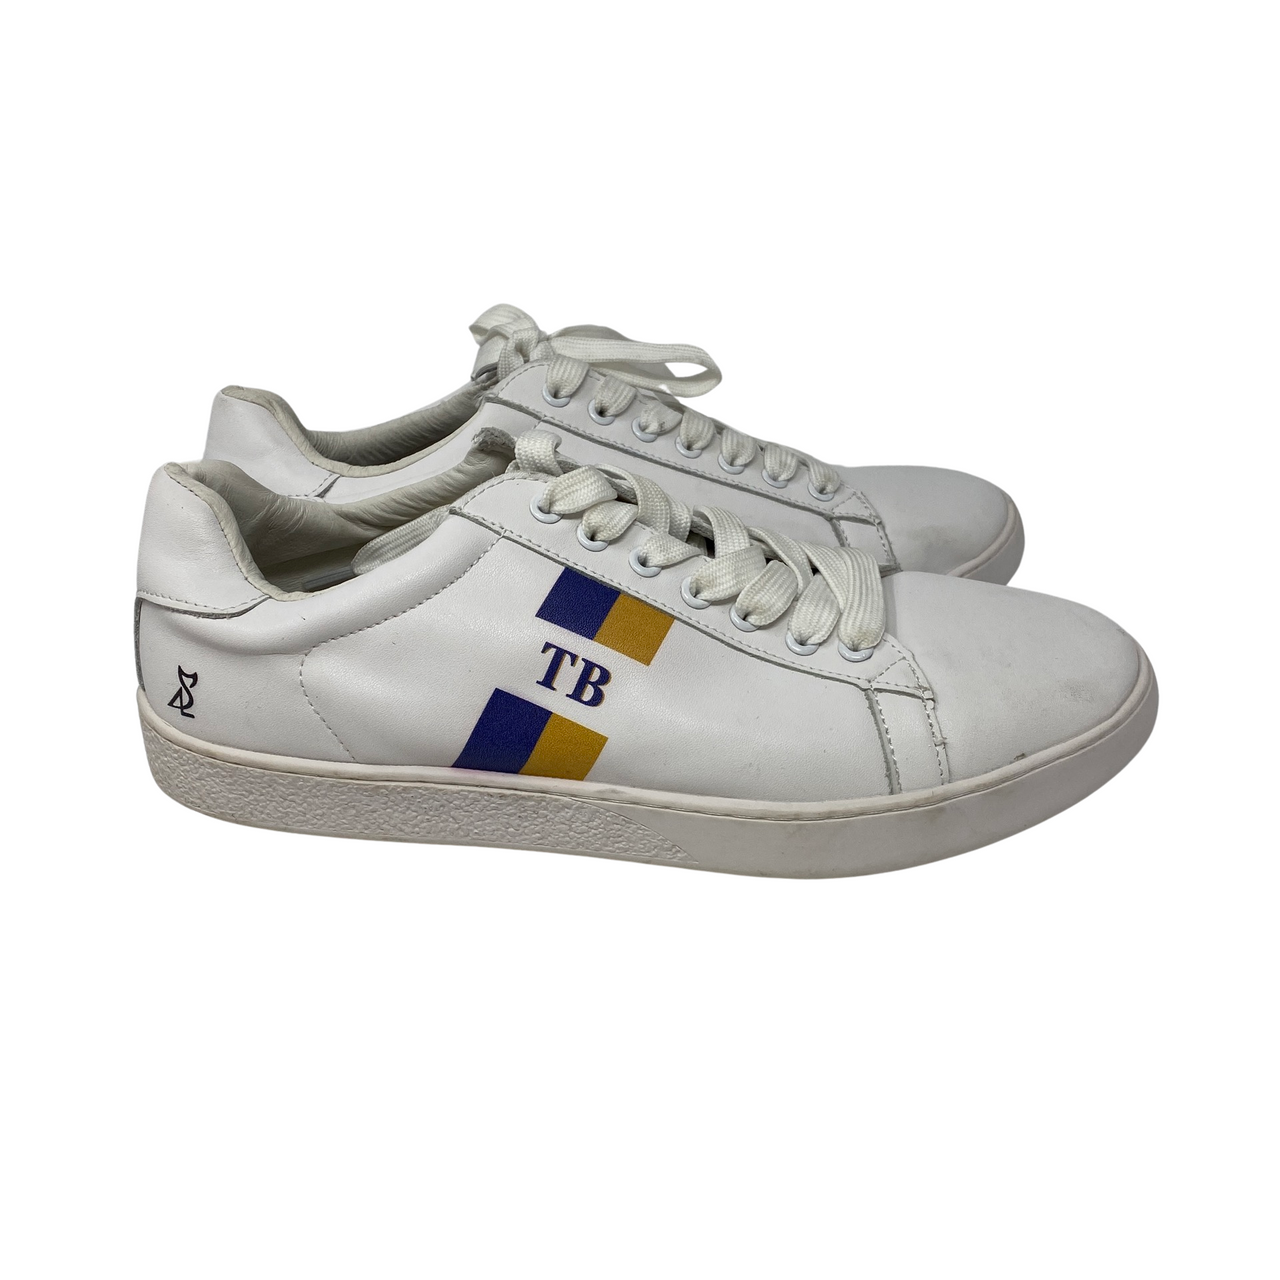 Skip and Lee TB Yellow and Blue Stripe Sneakers-side